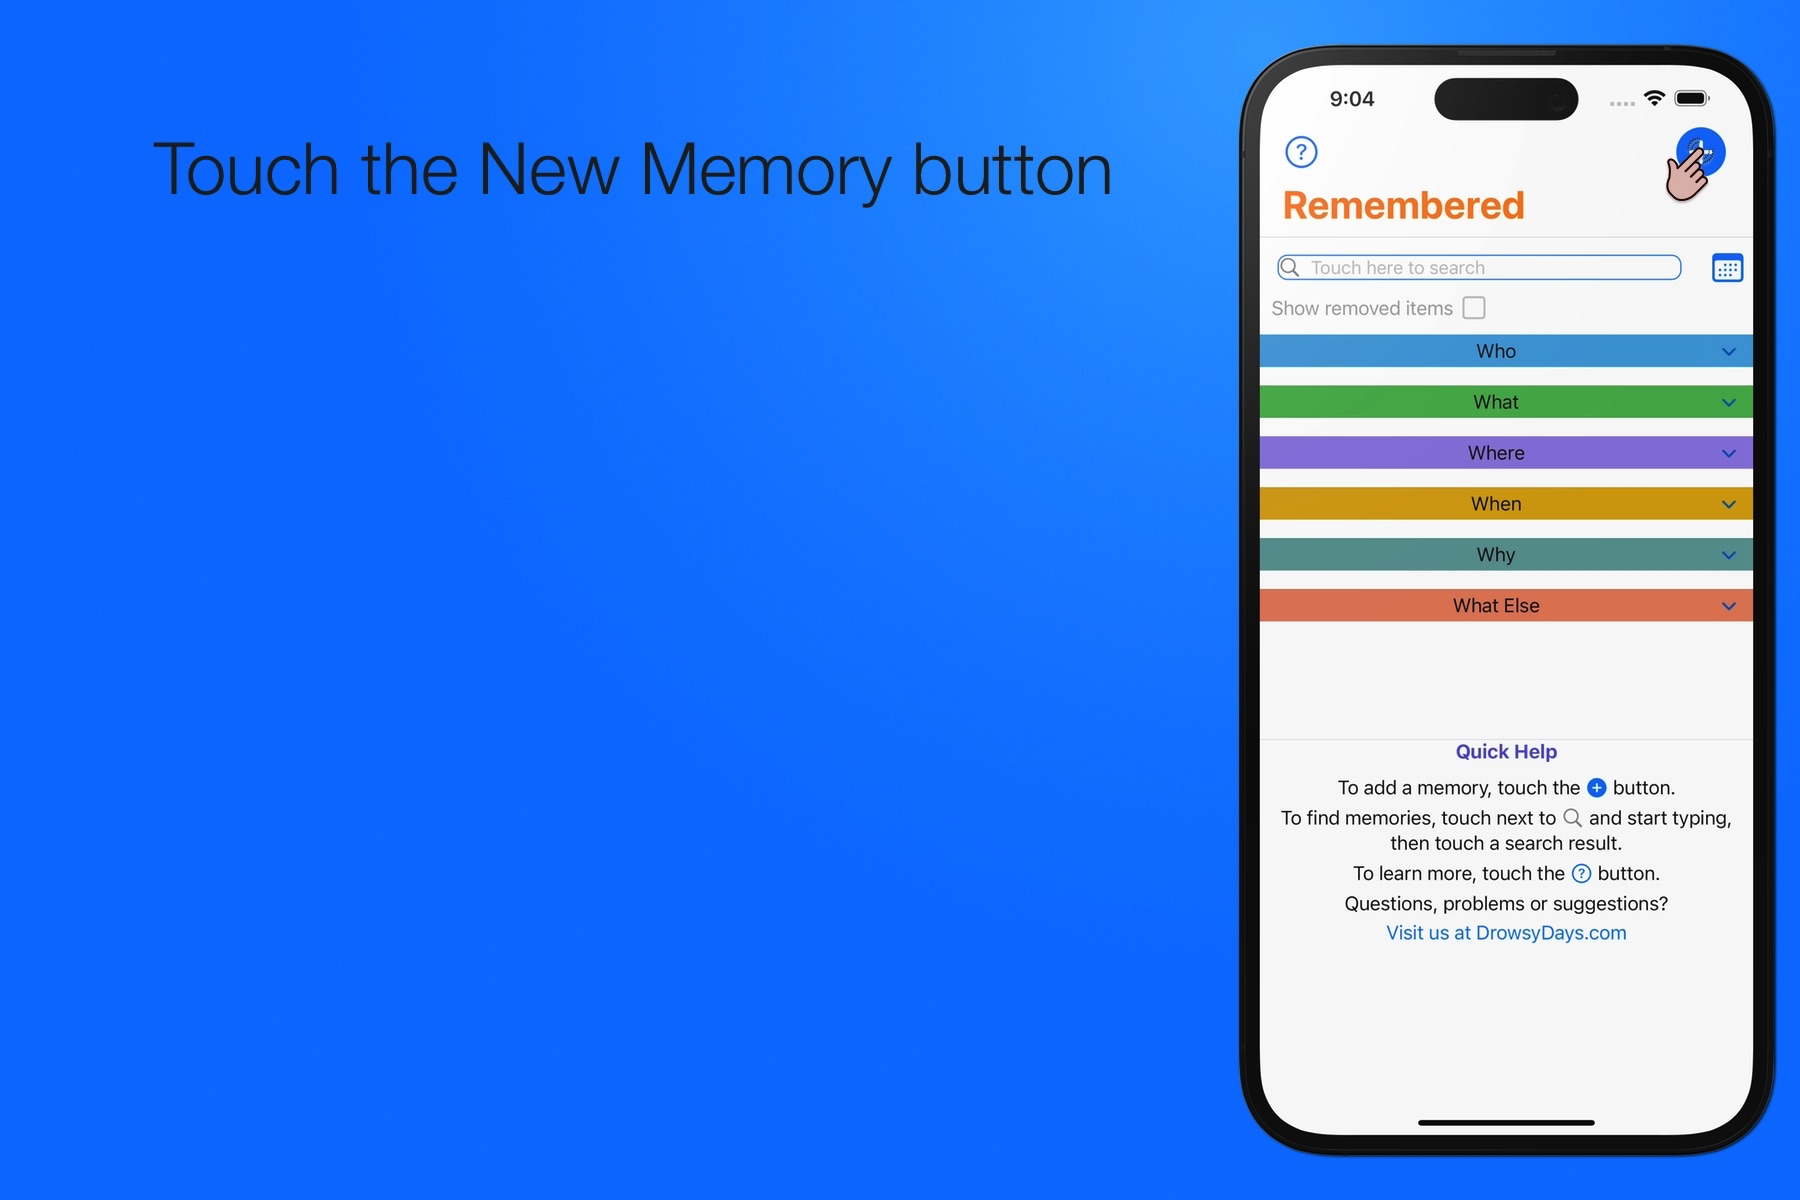 Touch the new memory button